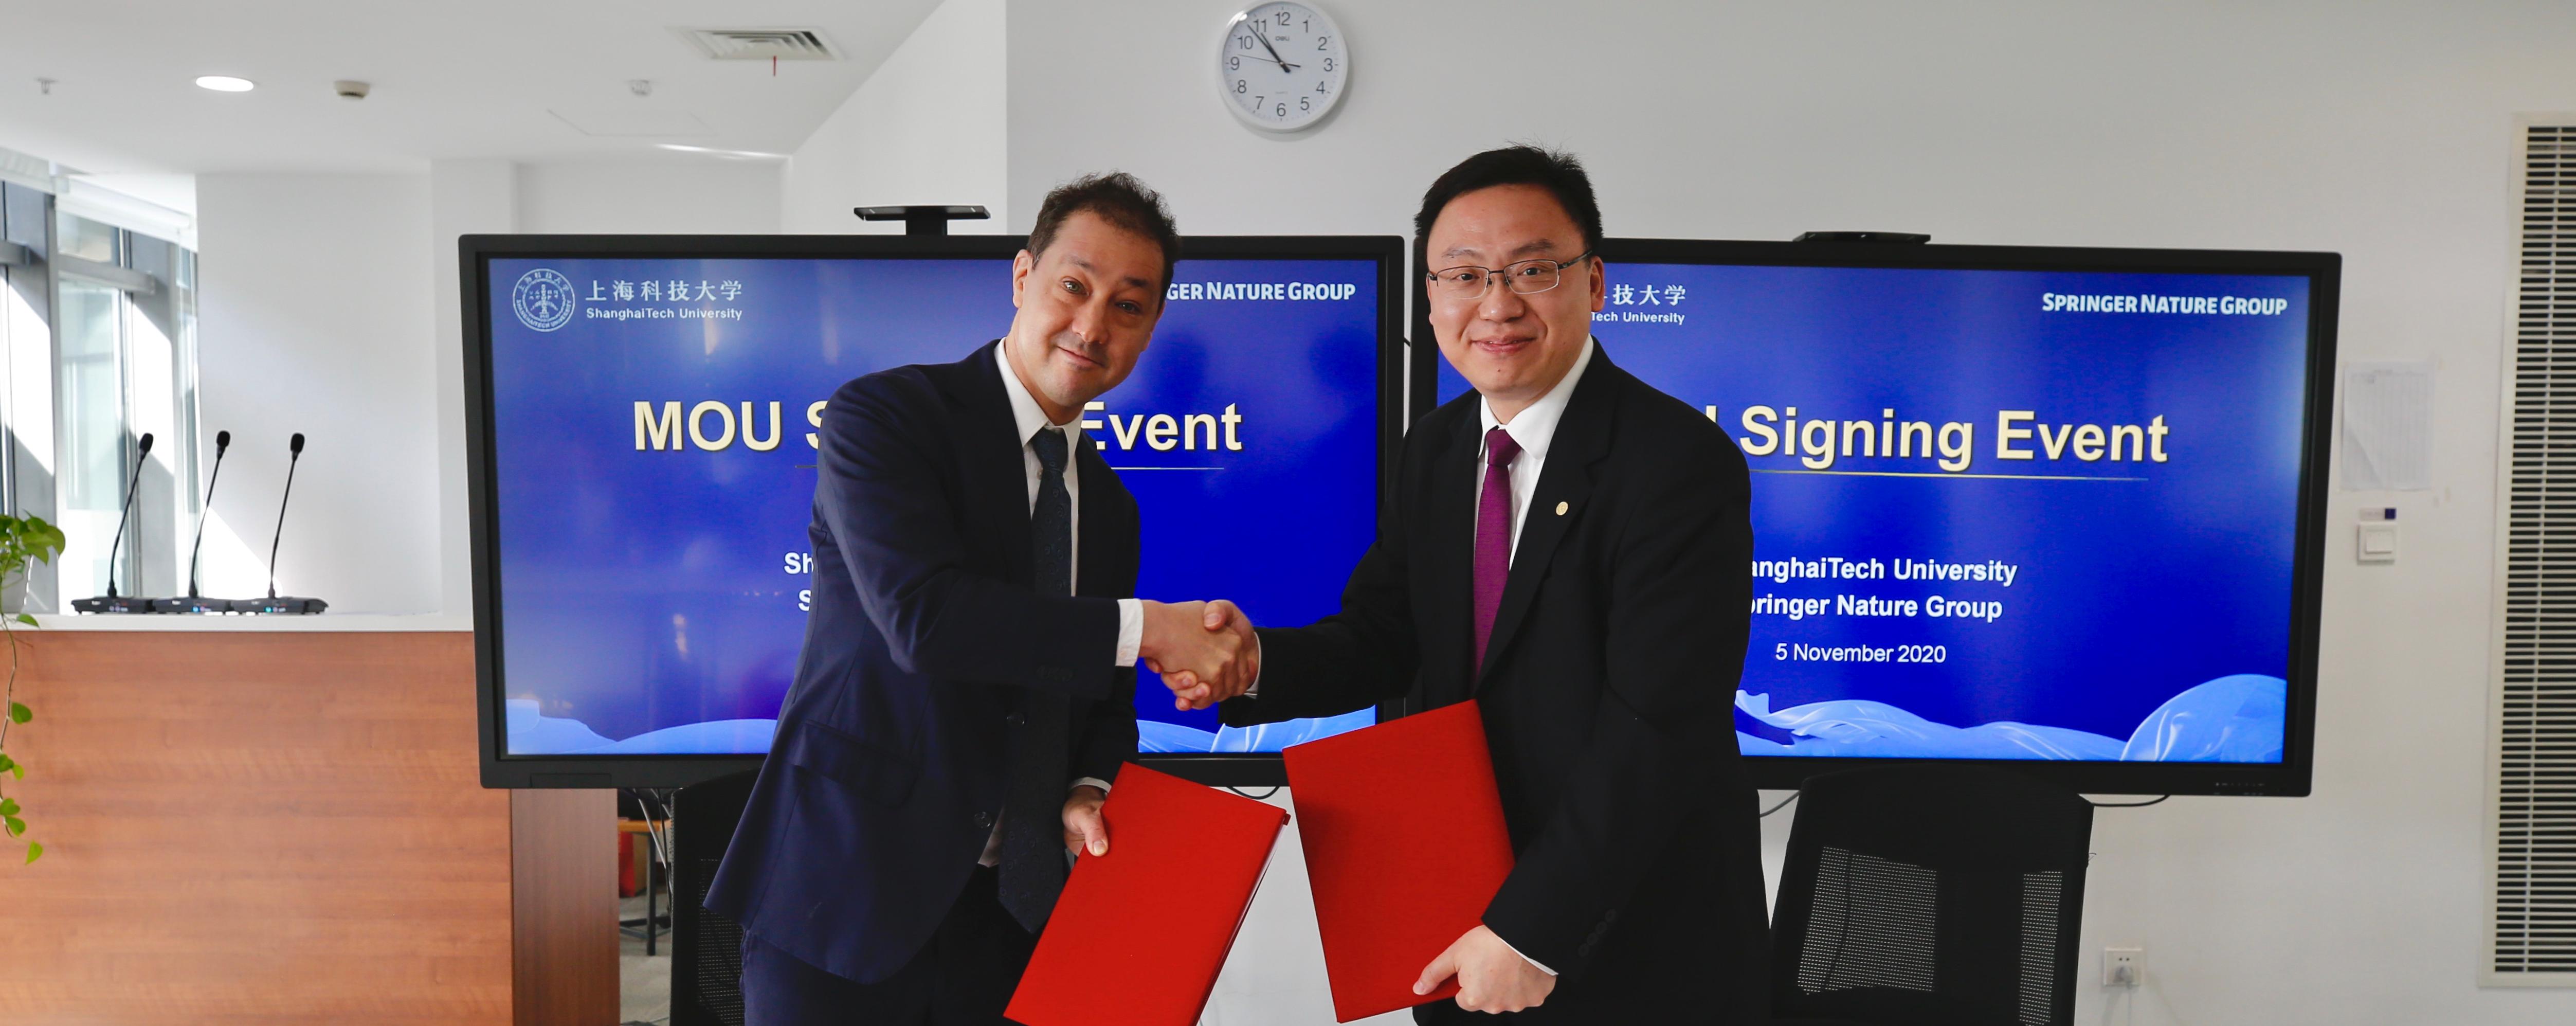 Springer Nature Group visited and an MOU was signed with ShanghaiTech